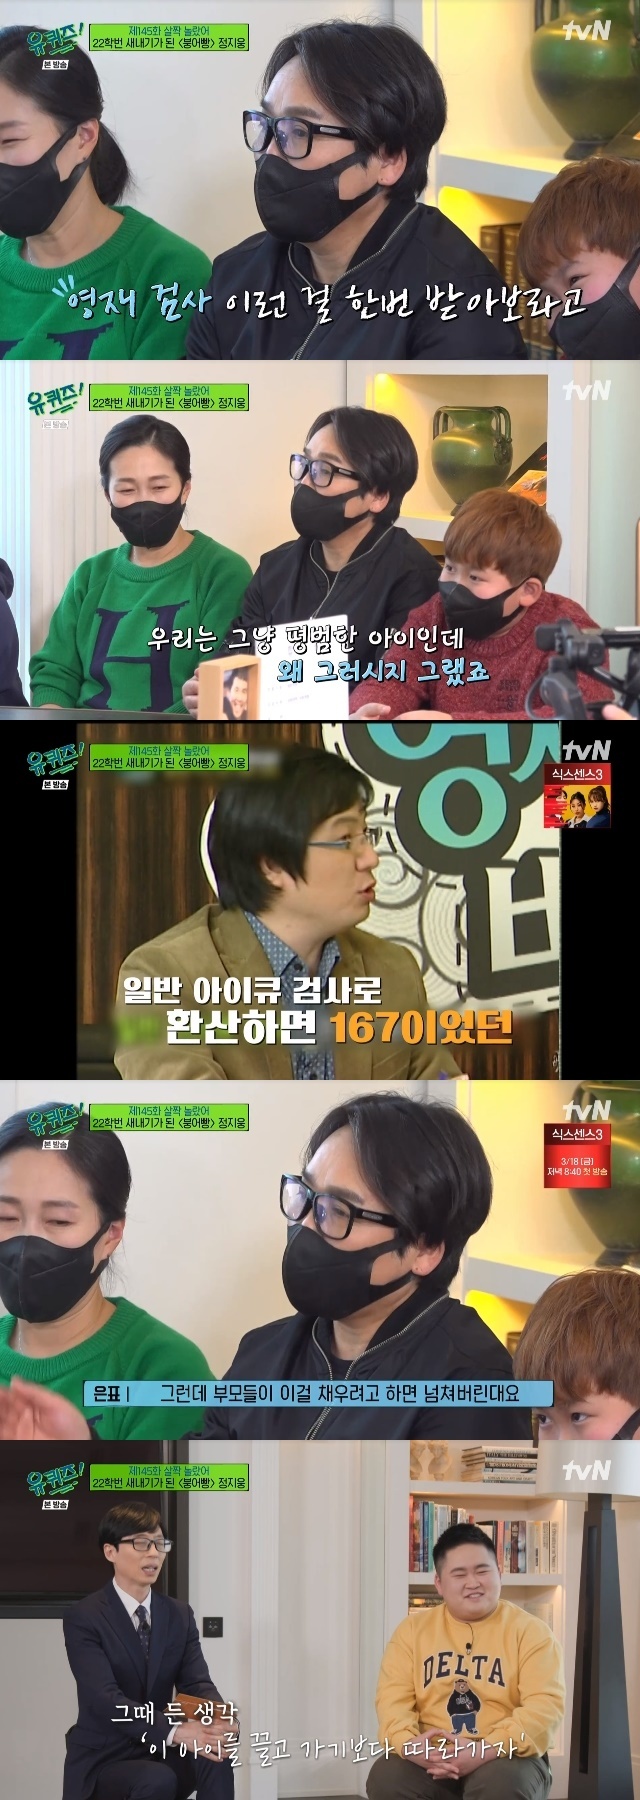 Actor Jung Eun-pyo delivered his son Jung Ji-woong, who had been different since childhood, and the resulting education law.In the 145th episode of TVN You Quiz on the Block (hereinafter referred to as You Quiz on the Block), which was broadcast on March 16, the eldest son of actor Jung Eun-pyo, who recently announced the passing of Seoul National University, appeared as a guest.Jung Woong, who introduced himself as a freshman in the 22nd grade of the humanities department of Seoul National University, said, In fact, I did not know how to stick.I thought I should go to Seoul National University while working hard for a year, but I am so honored to pass and I am still surprised. Yoo Jae-Suk also expressed his pride when he visited the set together: Its so good, we posted a video on our personal channel confirming the announcement of the successful candidate.Regardless of our intentions, there are many rumors, and it is embarrassing and shameful, but it is too good in the inside. Asked how he felt at the time of his passing, Jung Woong said, Once the entrance examination is over, it is not over.I have to pass it, but I think that the one-year long journey is really over, so I am (happy). When asked how many questions were wrong in the CSAT, Jung said, The incompetents were 12-13 wrong. The SAT was grade 1 in Korean, grade 1 in mathematics, and grade 2 in English.The social culture was all right, so the first grade came out, he said.He also said that he did not eat food 100 days before the SAT, and that he said, I went up to the food room and went down.Instead, Jung Woong said, I go home and eat my mothers food or delivery food. It does not have to go down and come up. I eat more of it.On the other hand, Jung Eun-pyo said, I have been calling from a teacher who has been special since childhood.Jung Eun-pyo said: Were just a big-ass kid and why did you do that: I accidentally went on a gifted-looking pro, and at the time IQ was 167.The gifted professor says that these children are born with a very good bowl, and when parents try to fill it, they overflow.He said he could fill it any time. He wanted to follow. Watch. He thinks hes grown. We manipulated him.